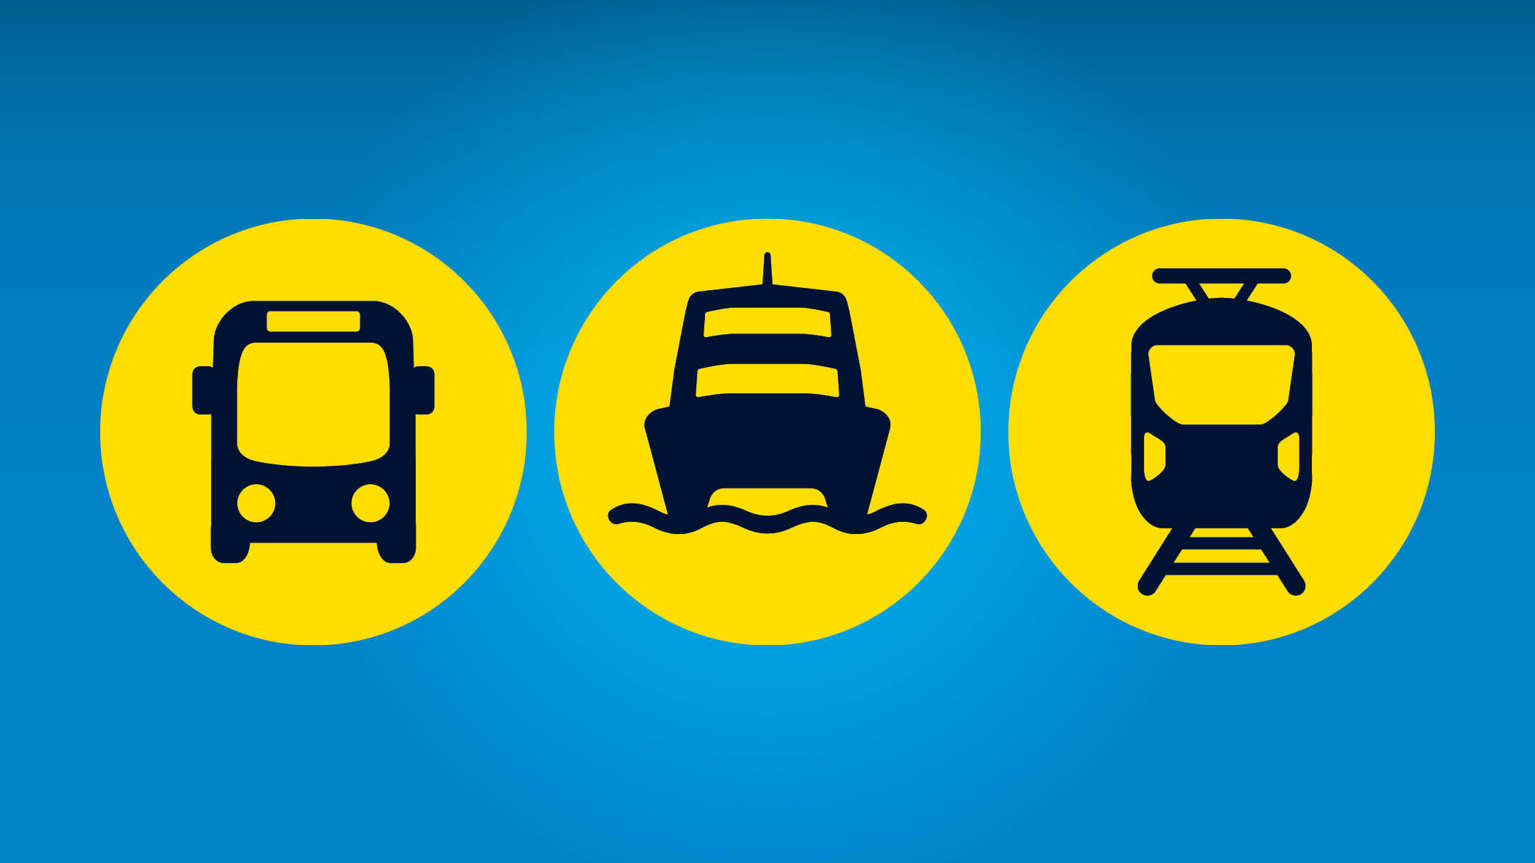 Blue background with three yellow circles. From left to right, the circles show a bus icon, ferry icon and a train icon.